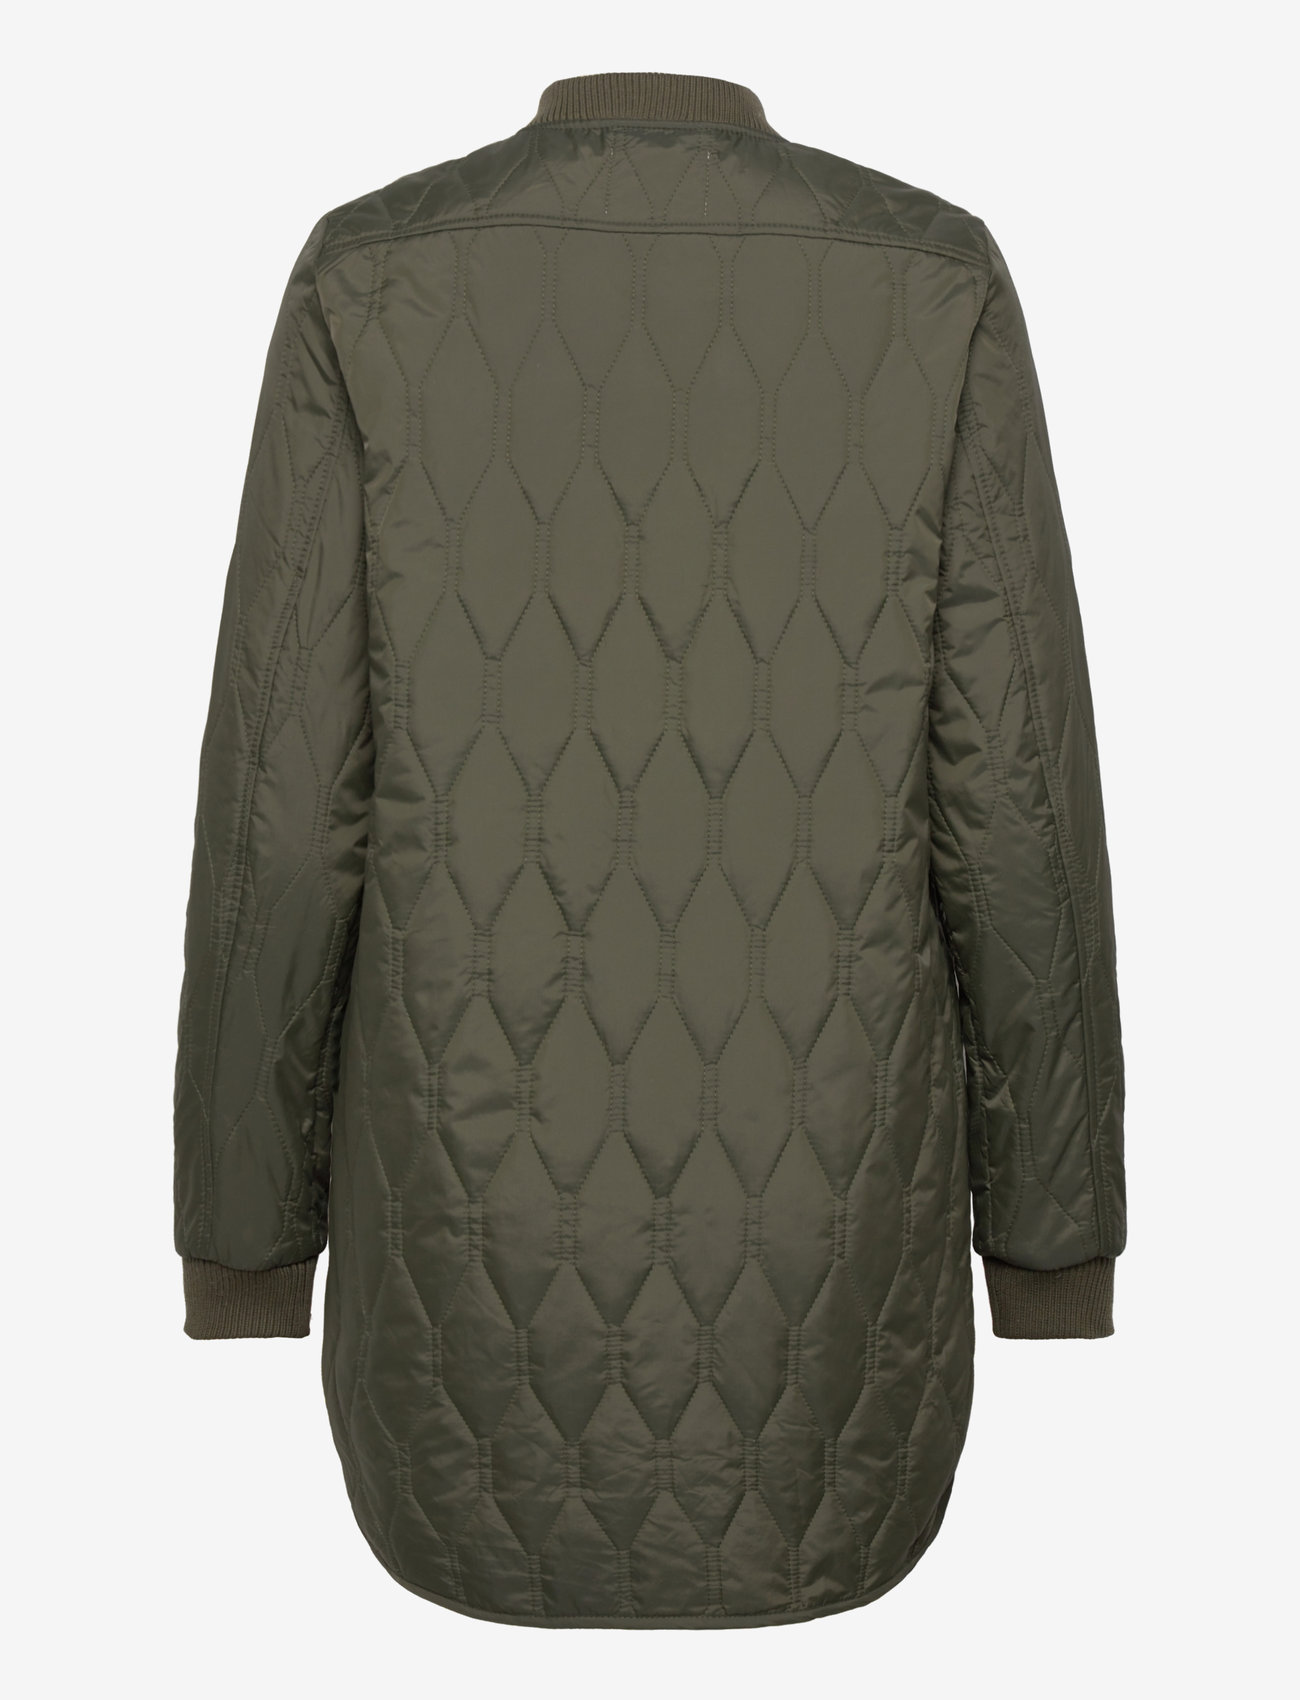 Global Funk - Even - quilted jackets - dark army - 1